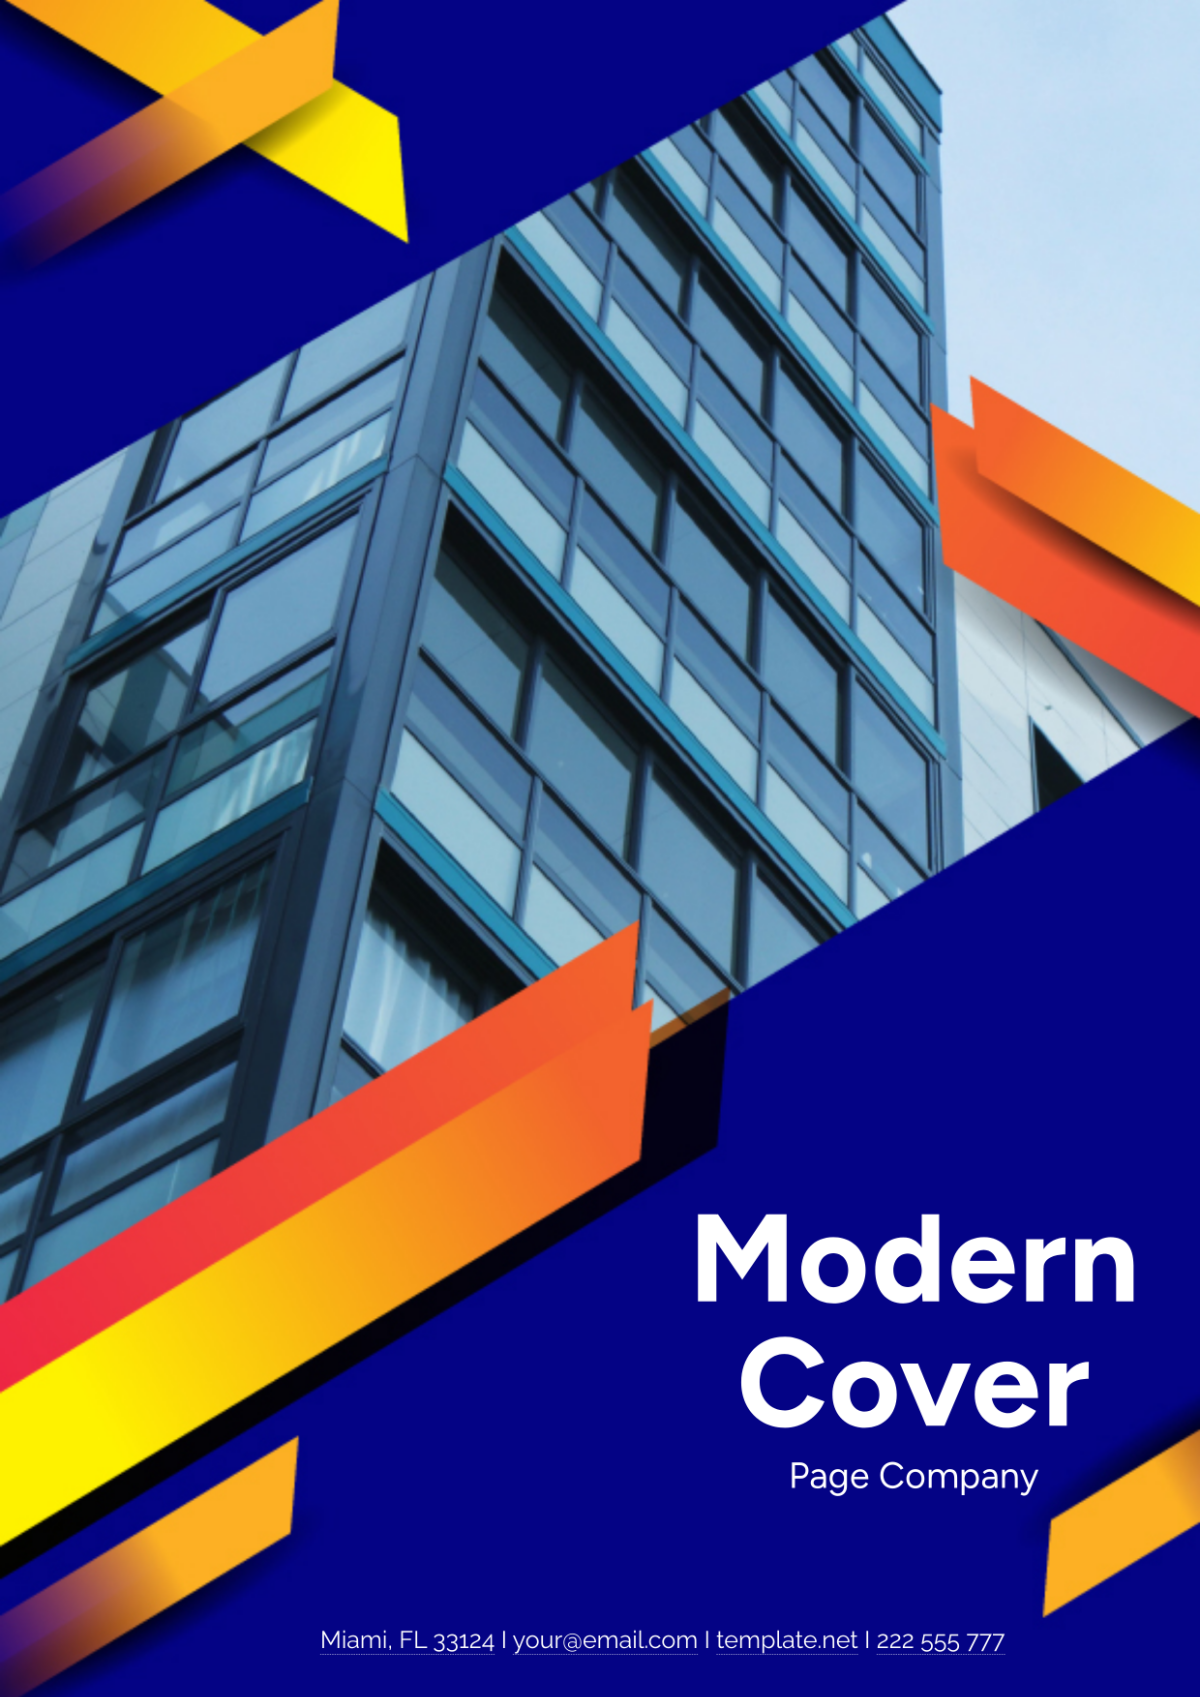 Modern Cover Page Company Template